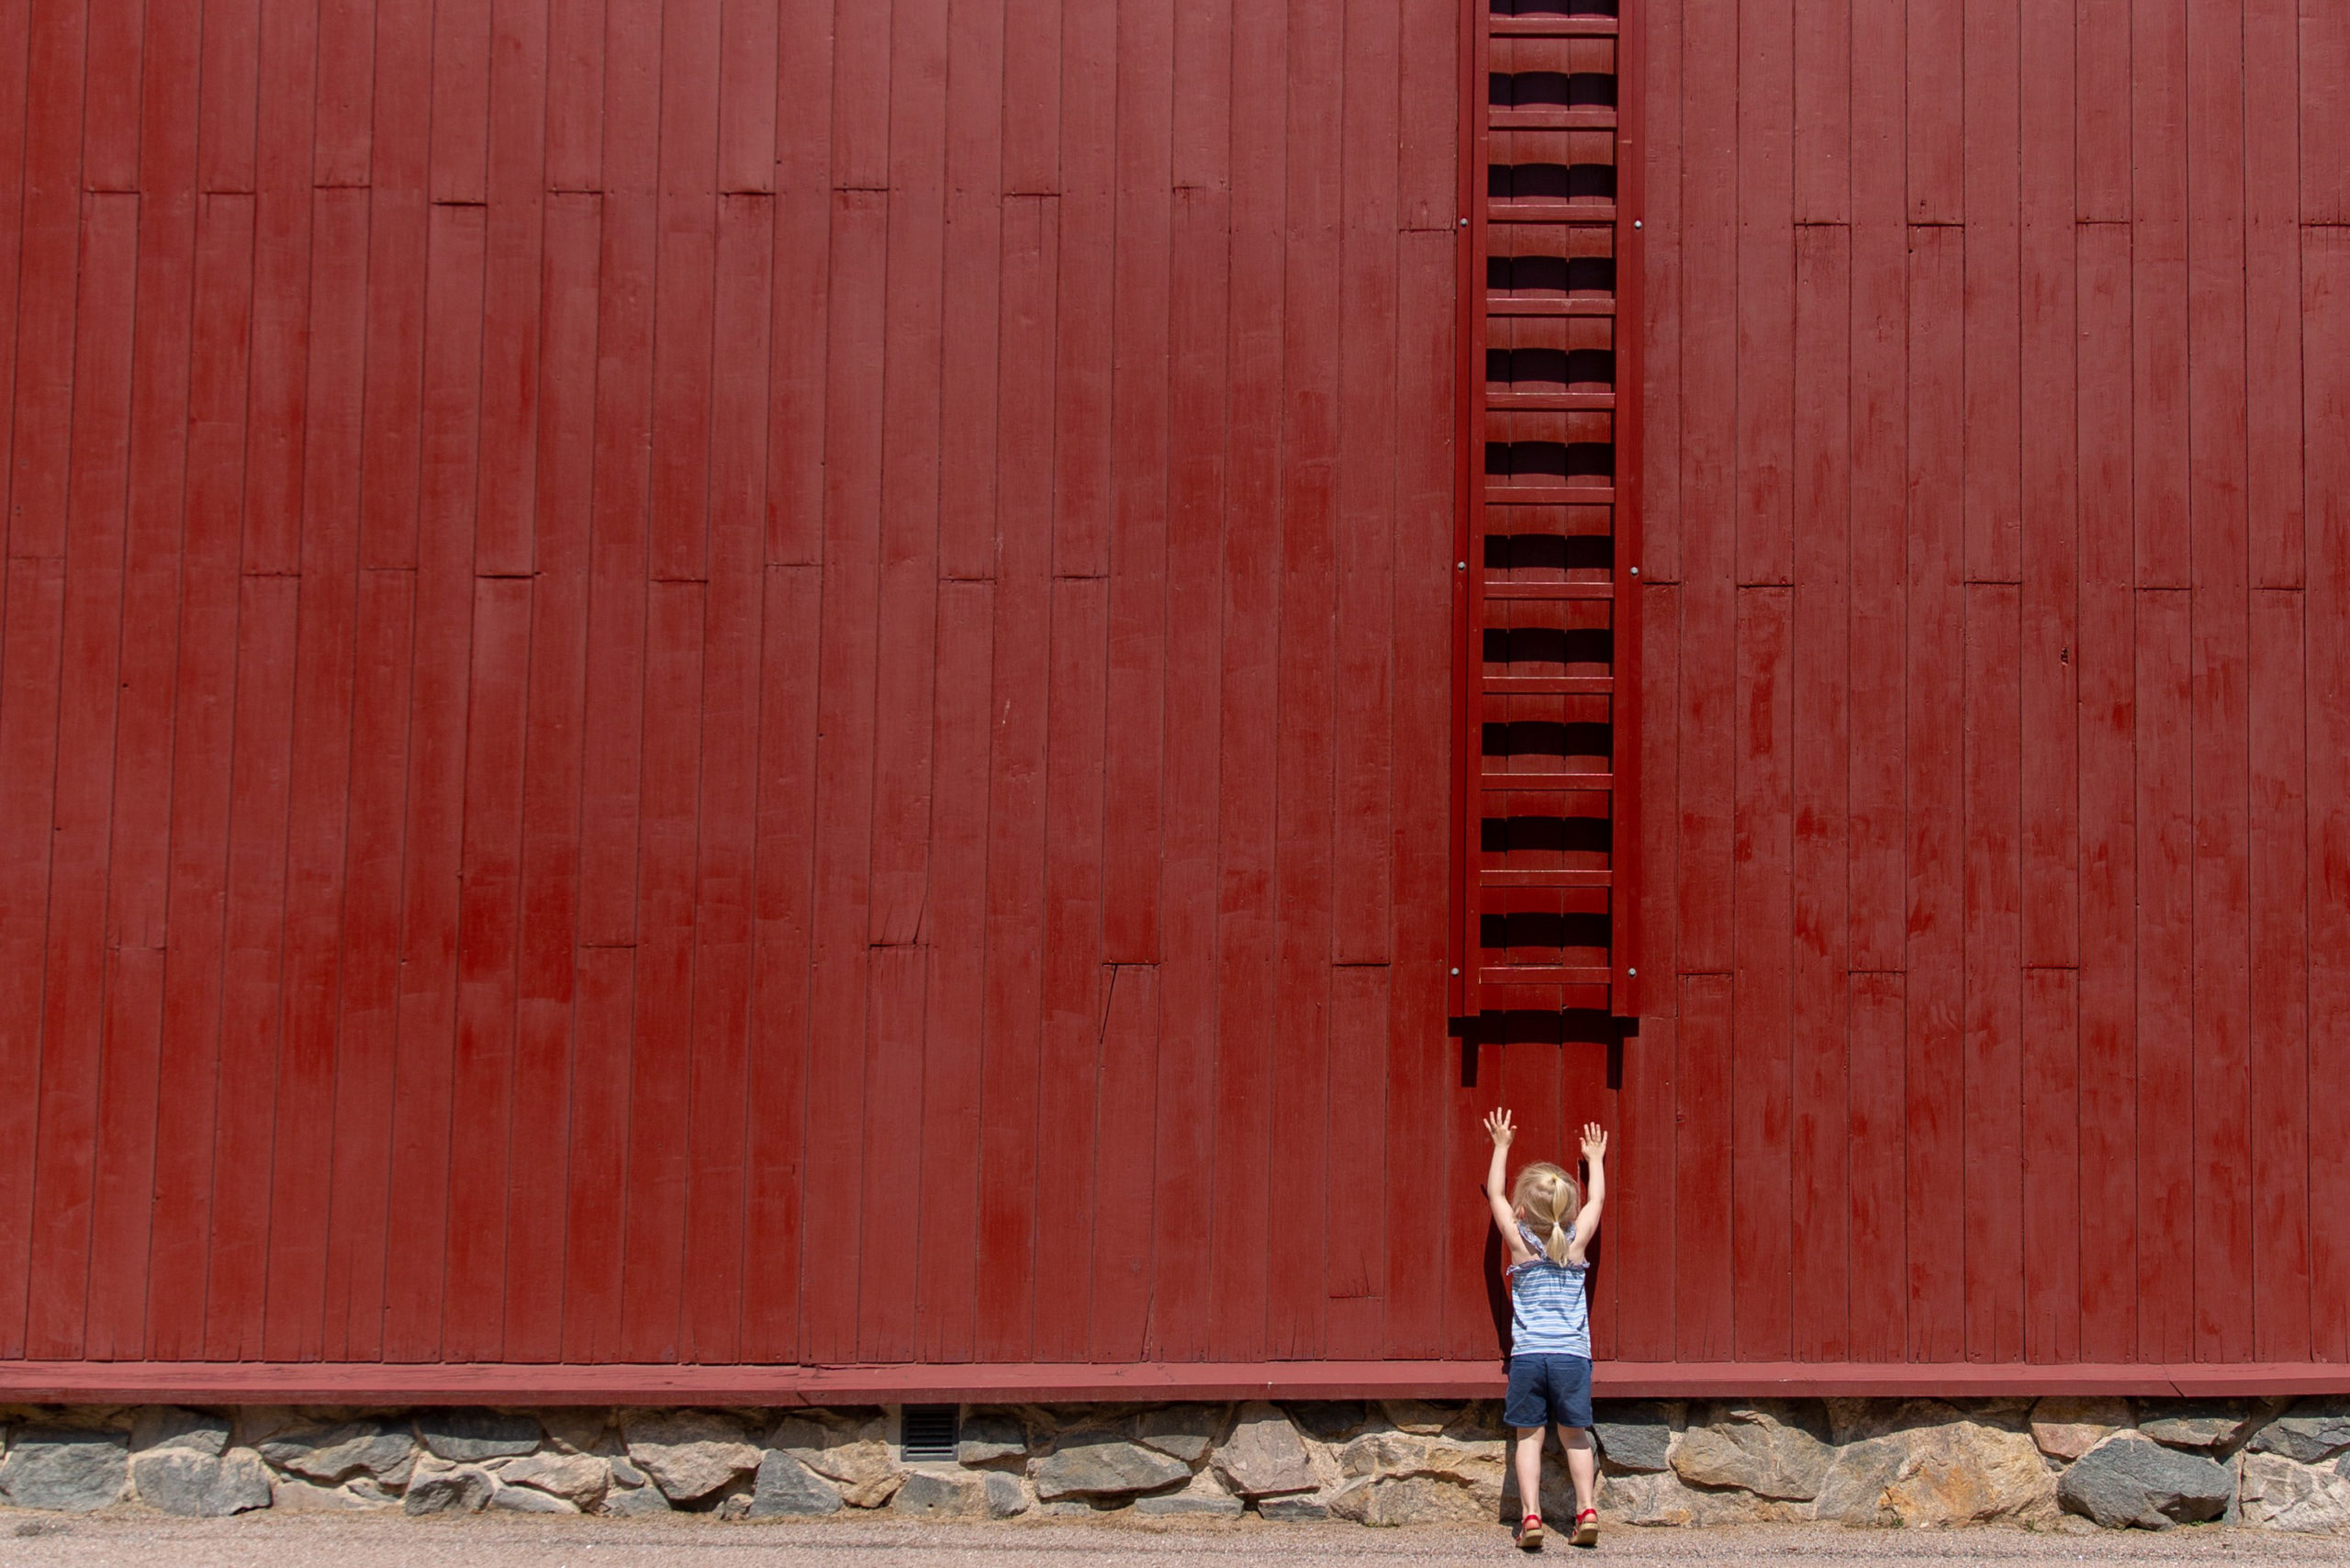 Negative Space in Photography - Red barn